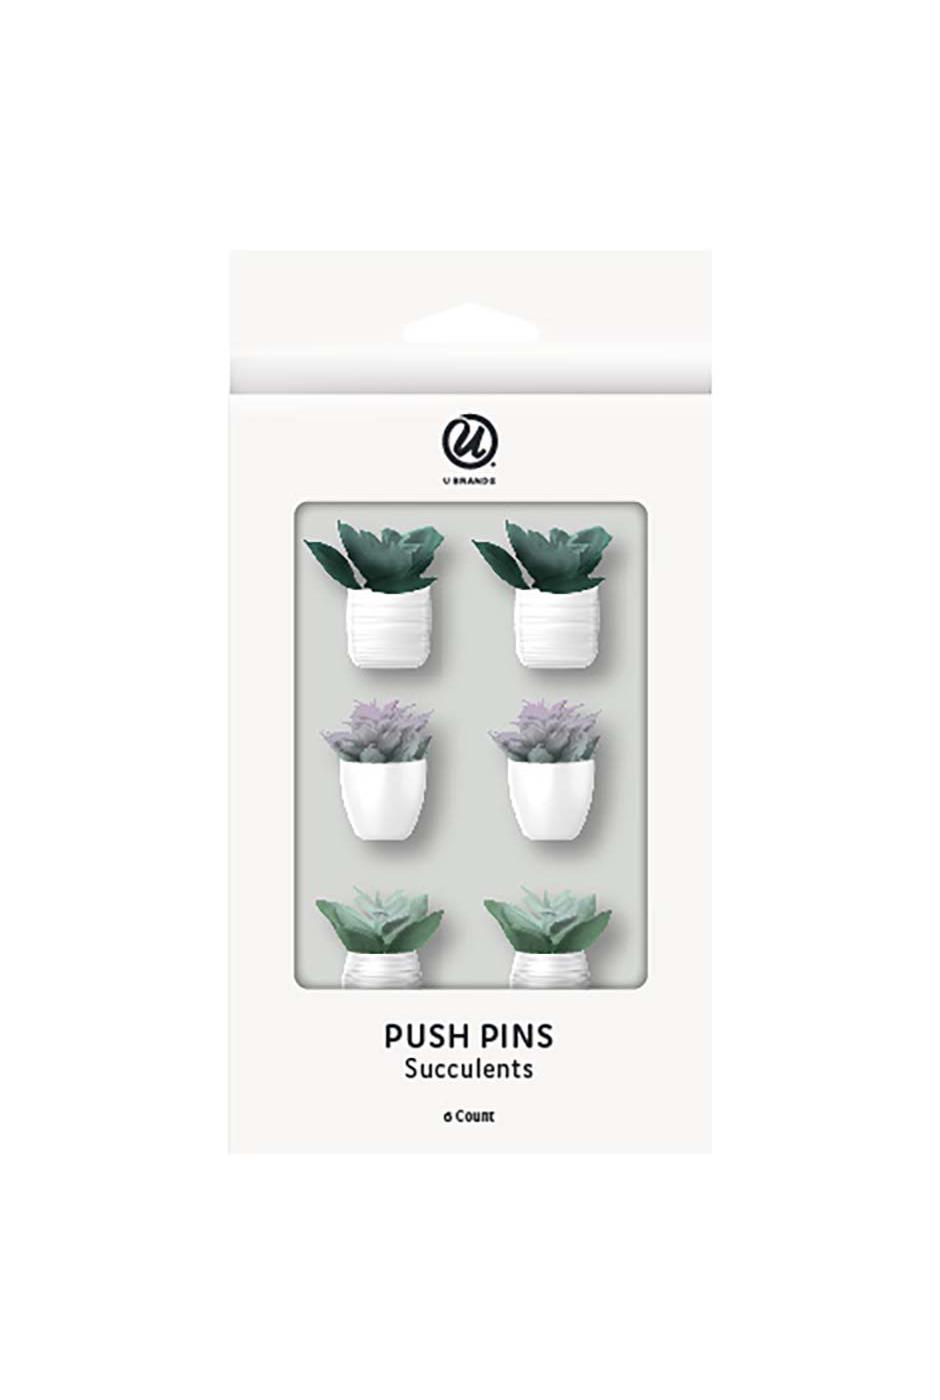 U Brands Potted Succulents Push Pins; image 1 of 2